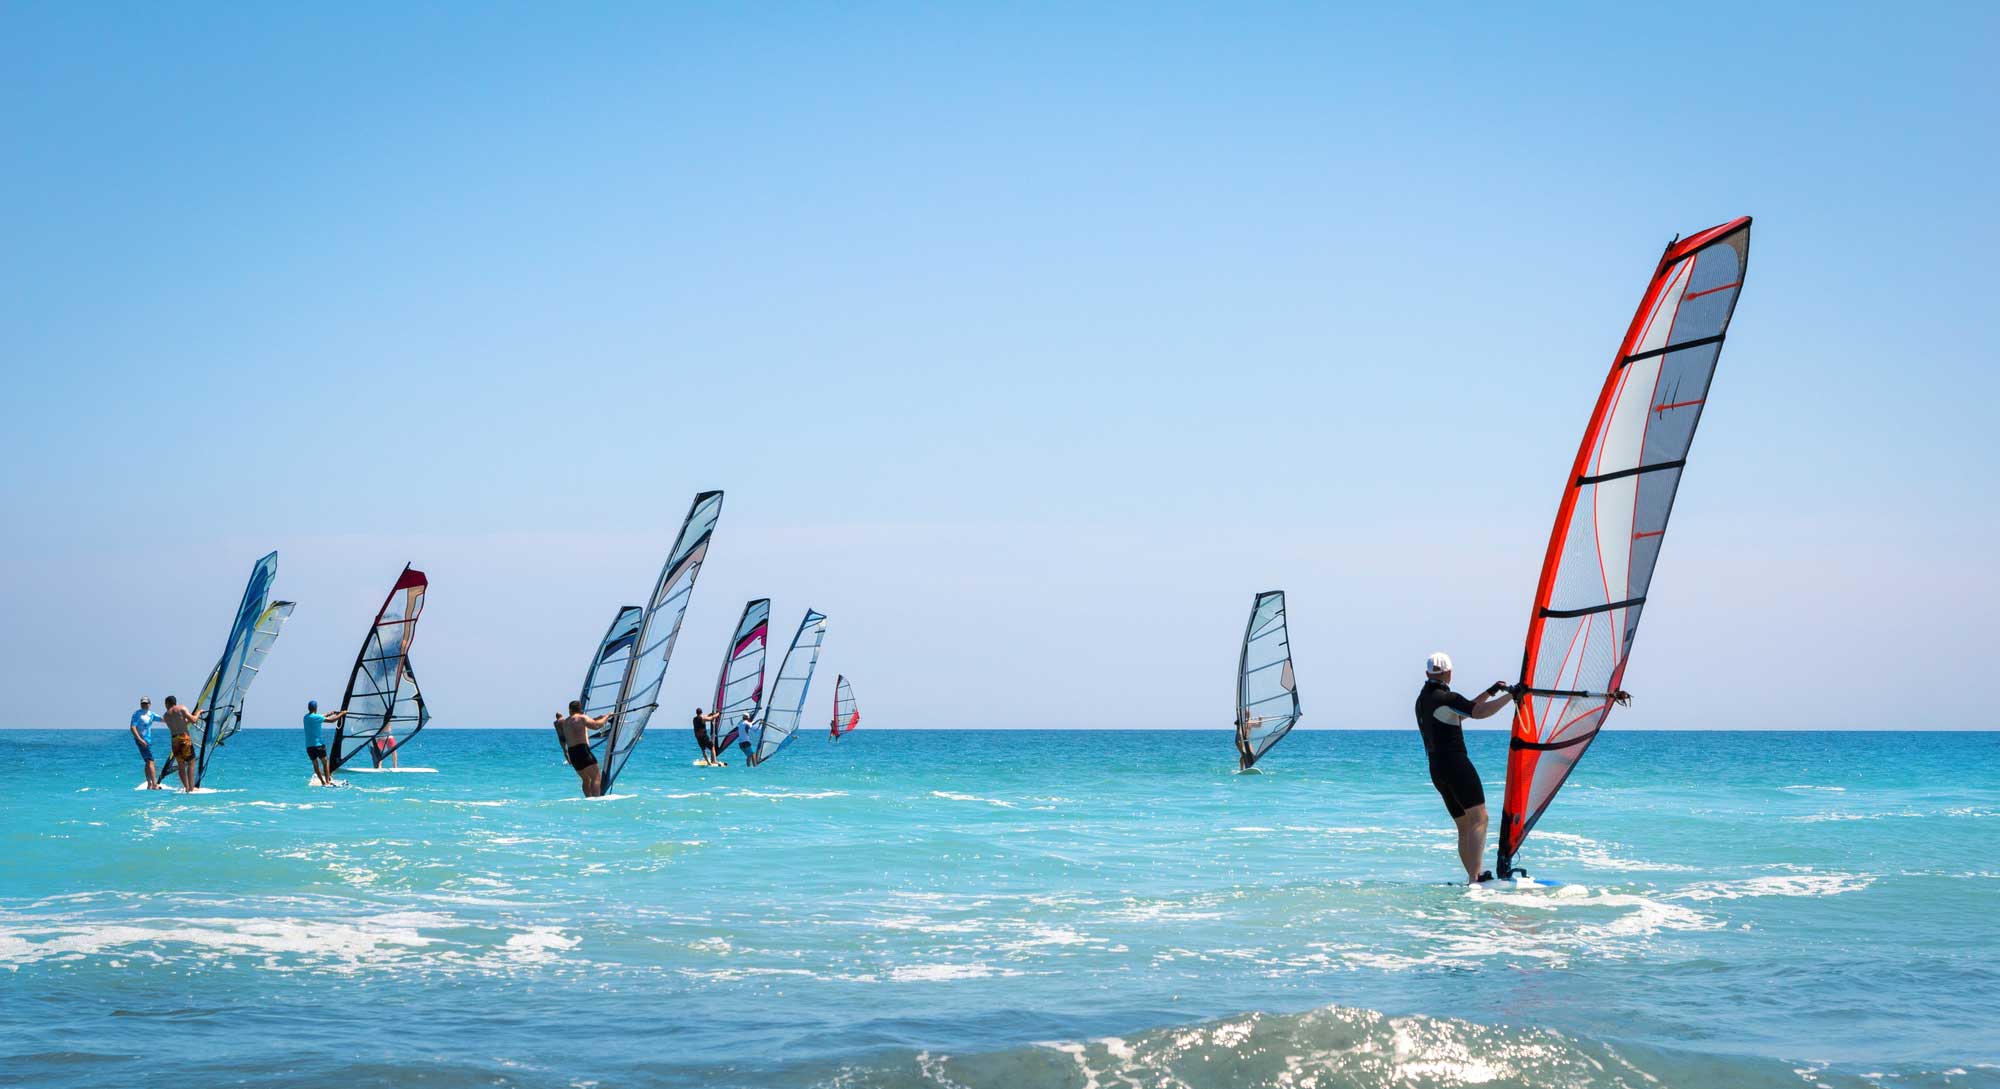 Windsurfing on Kos: Here’s Why the Island Is a Hotspot for Windsurfers